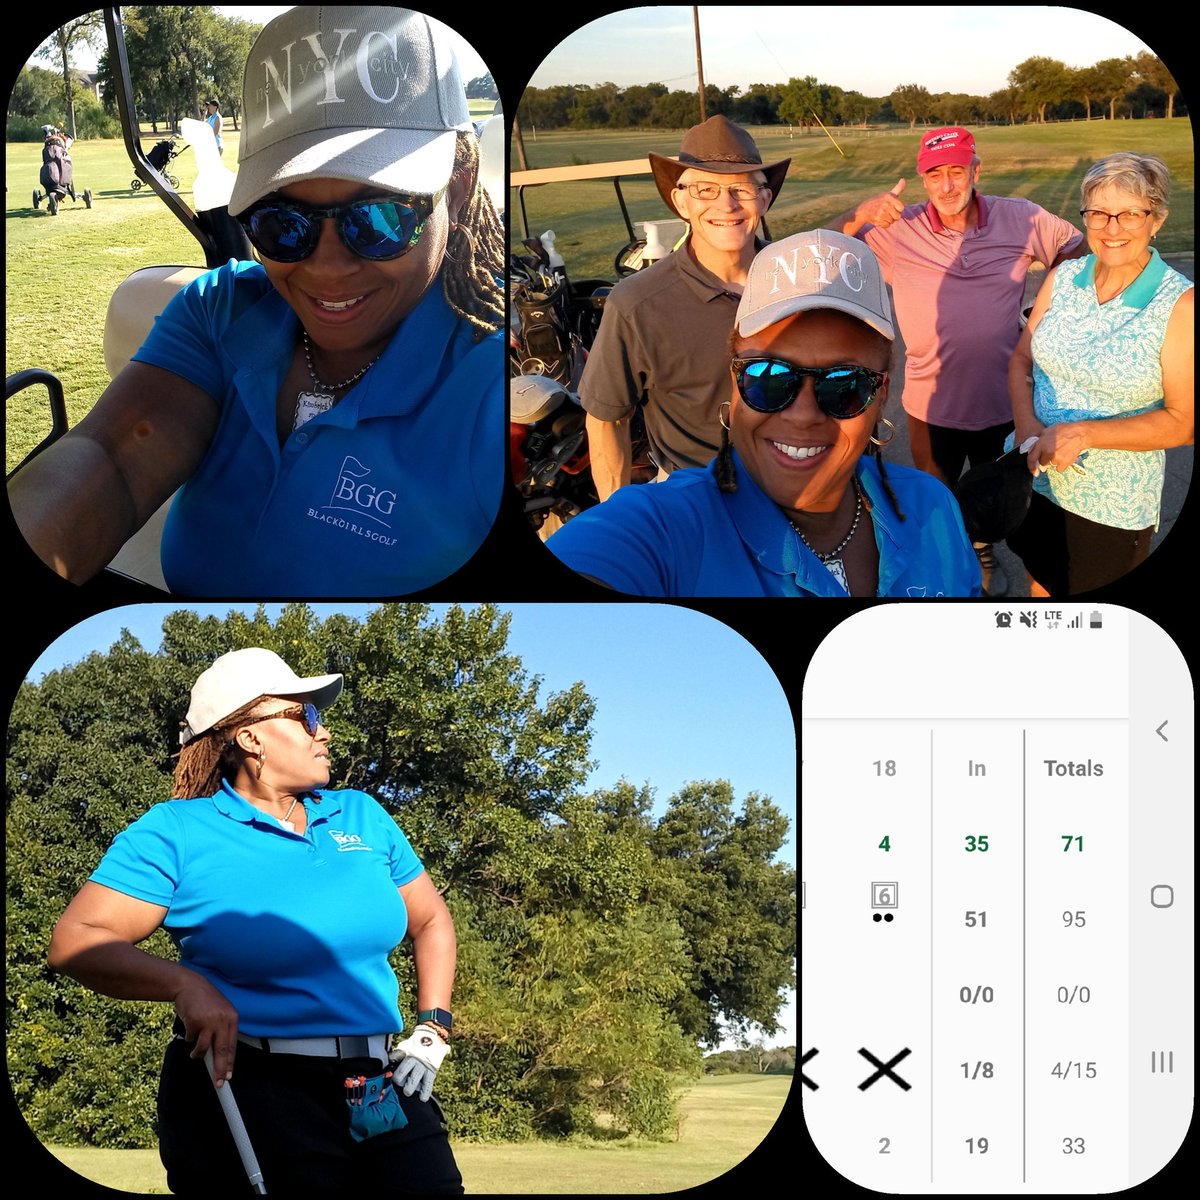 Nice crew. 
They were very relaxing to golf with. 
A little hot but a nice breeze coming through occasionally. 
#golfingfun 
#sundayfunday